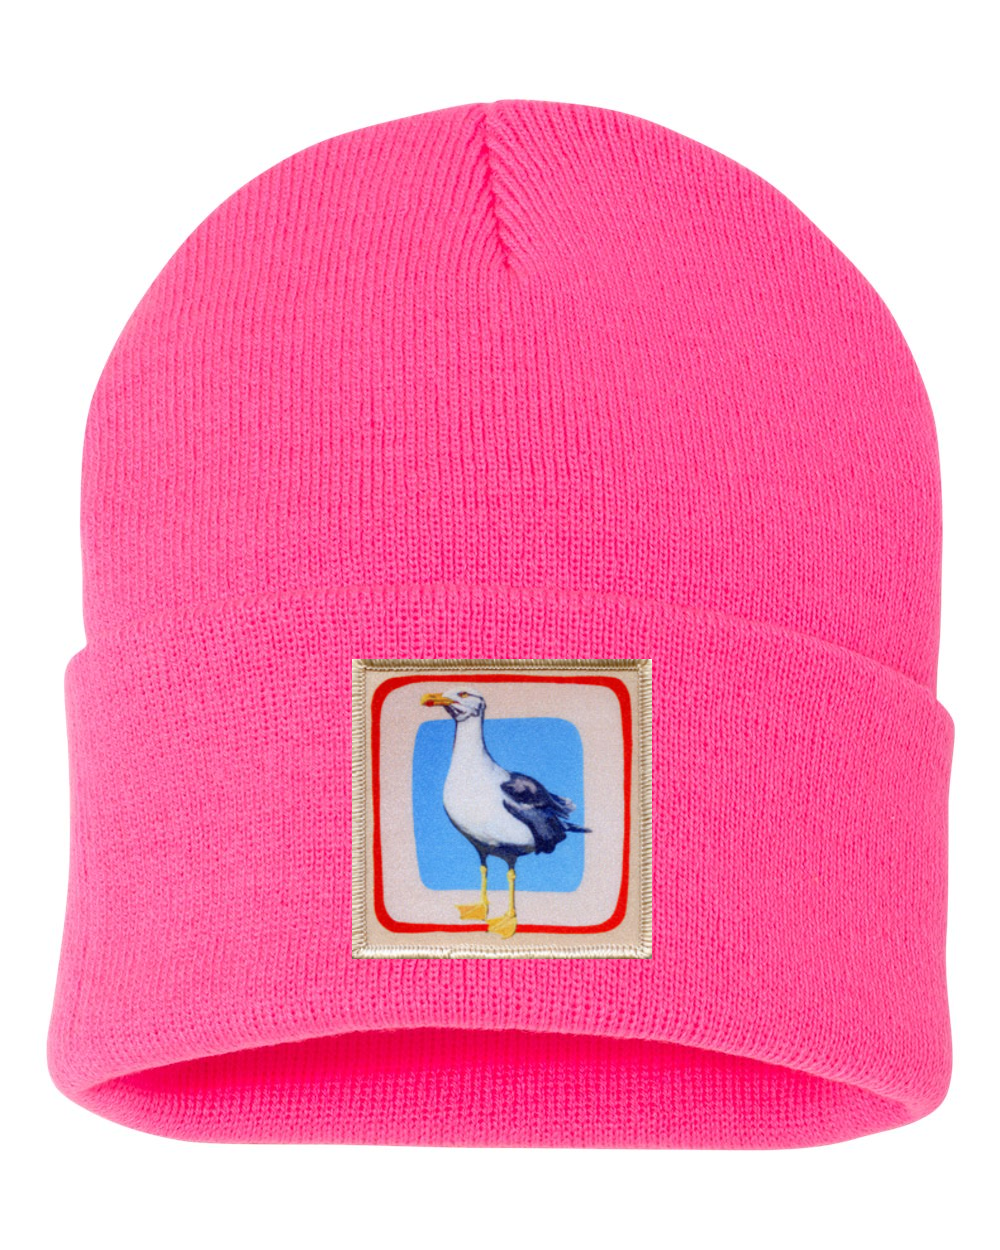 Seagull Hats FlynHats Neon Pink  